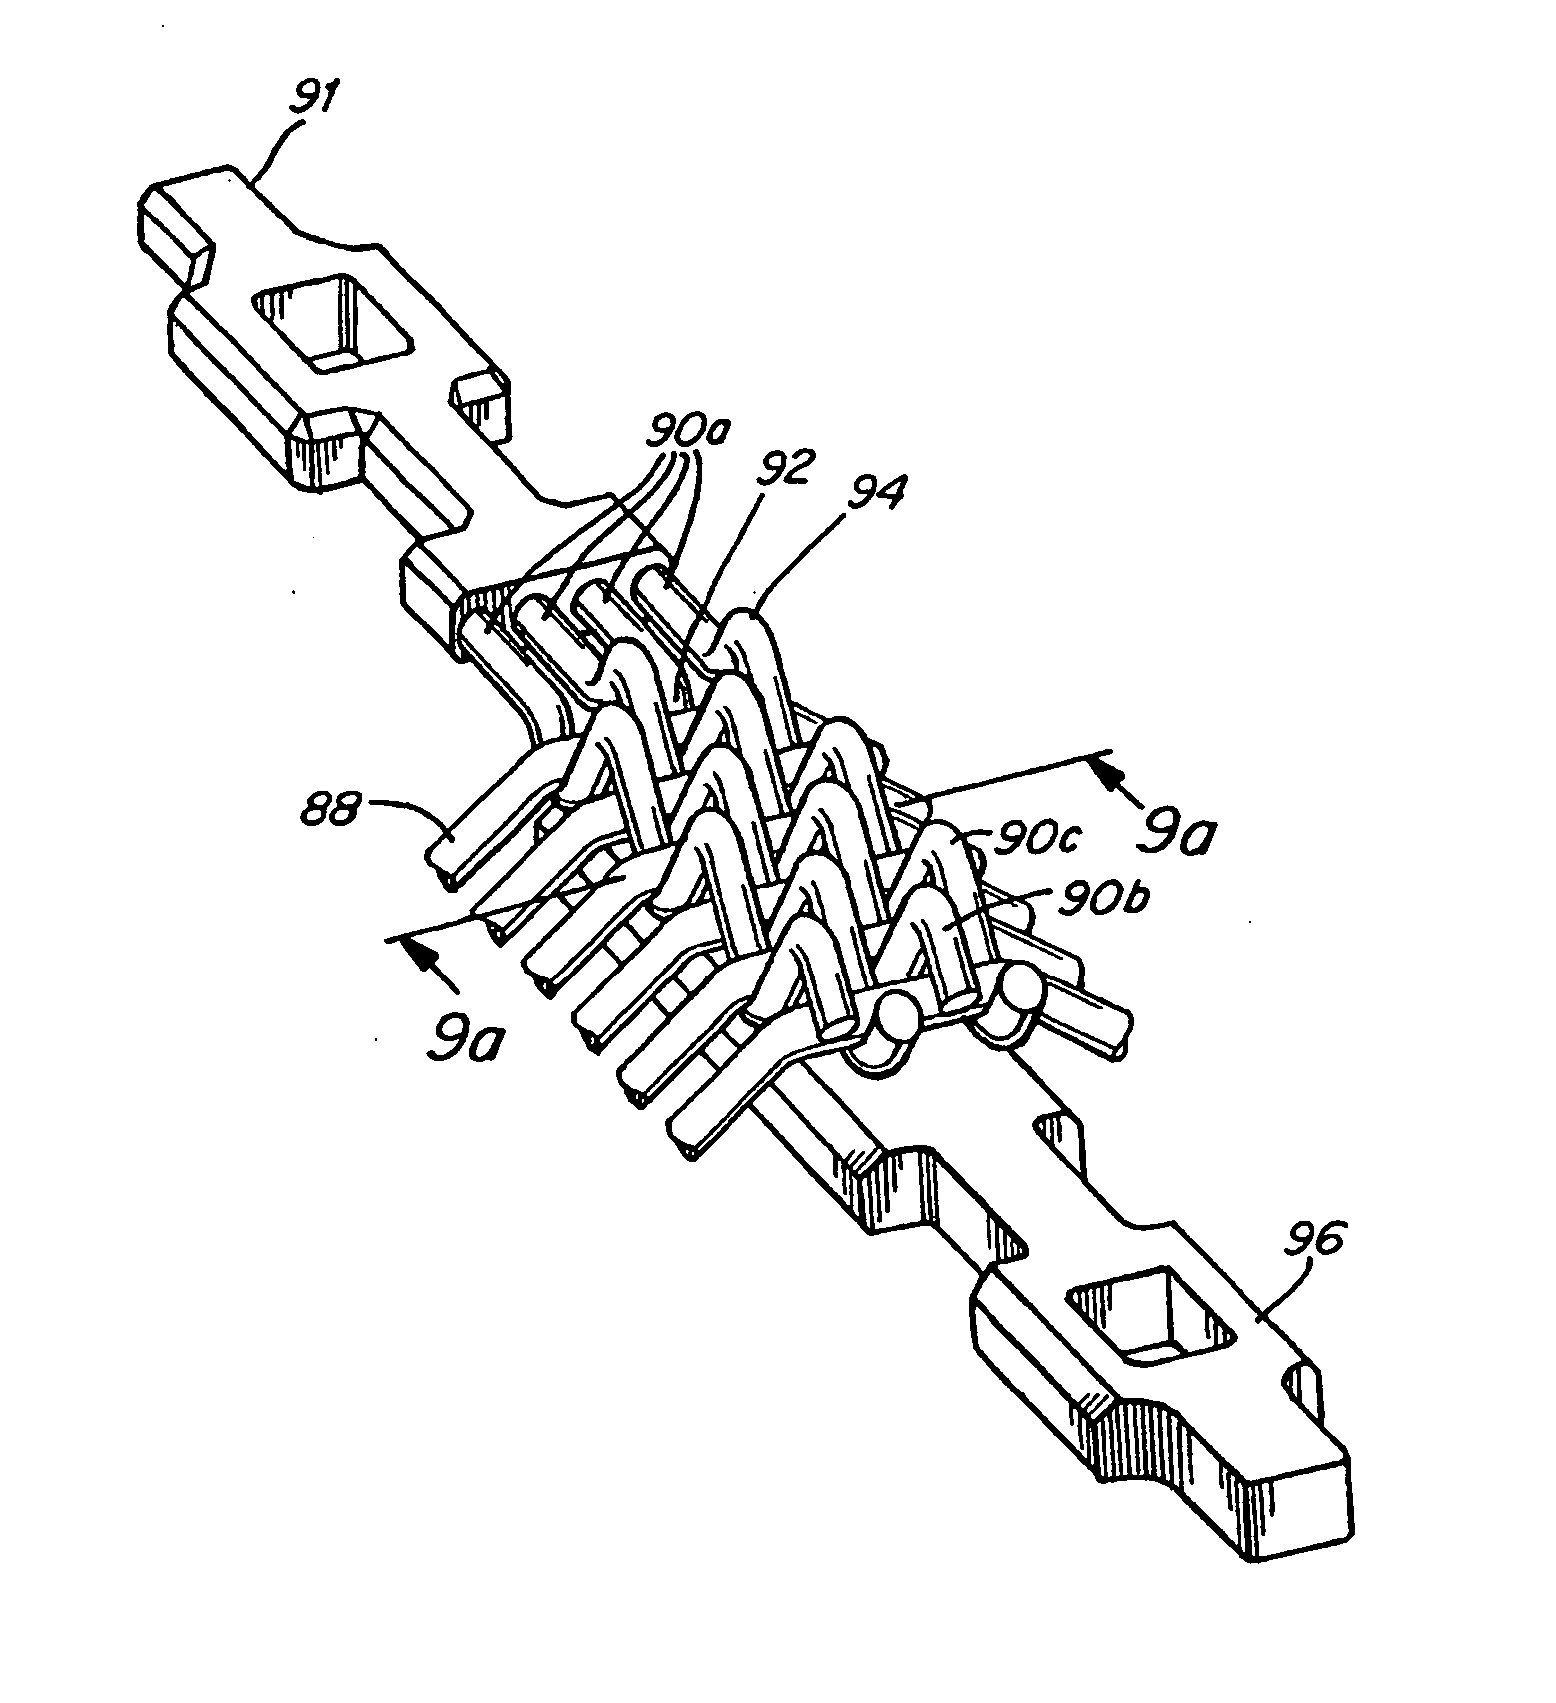 System and methods for connecting electrical components